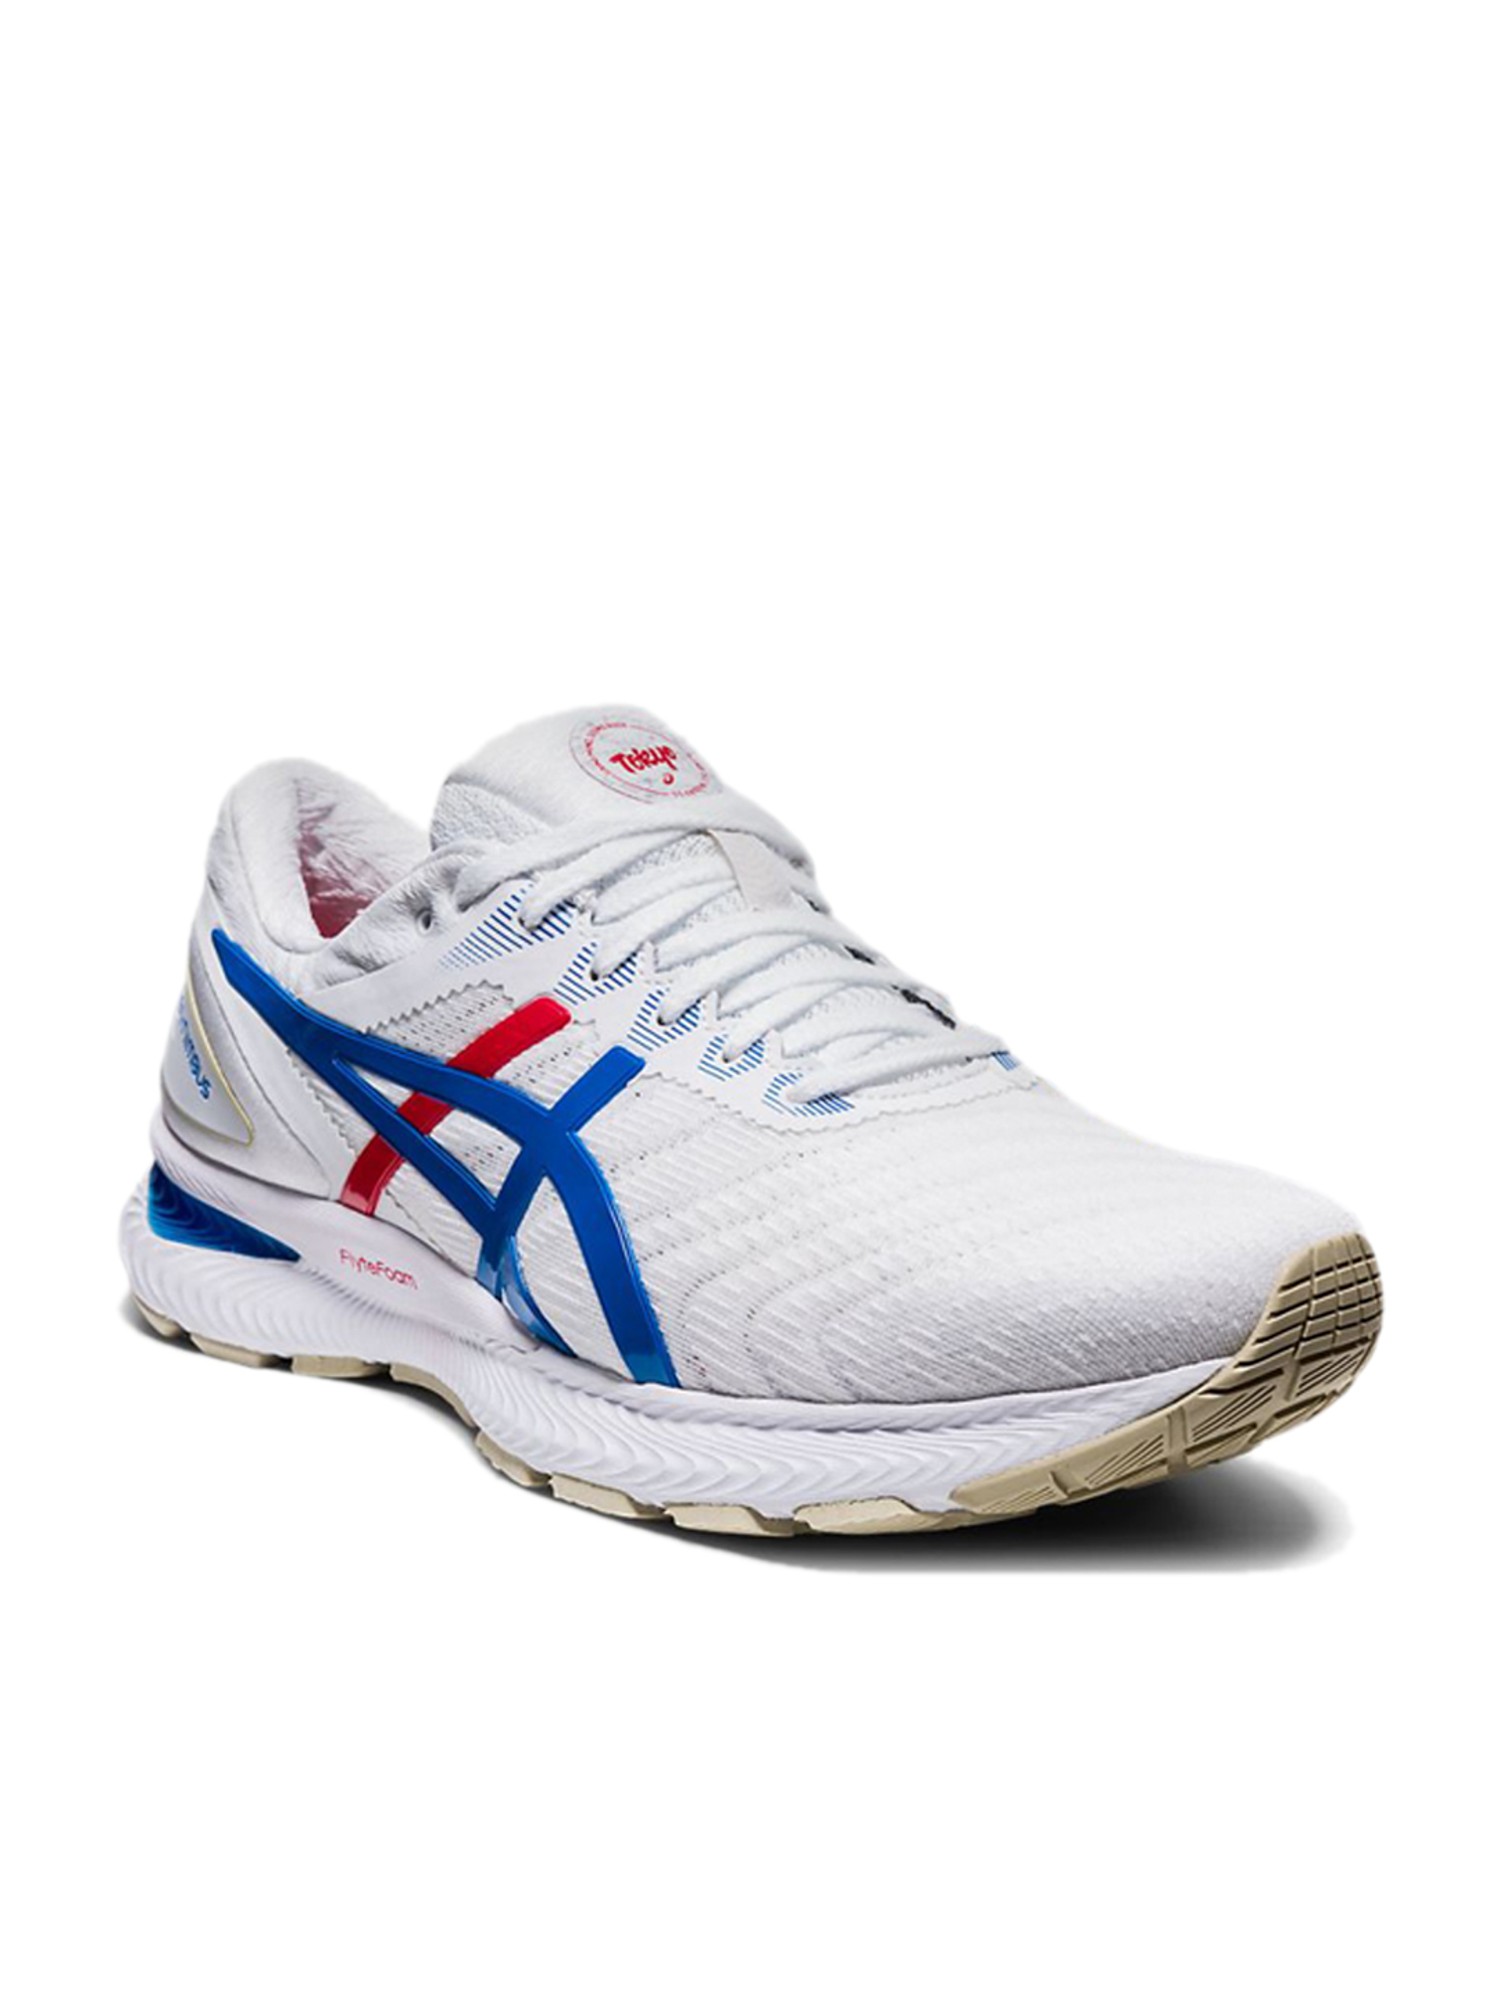 active asics womens shoes